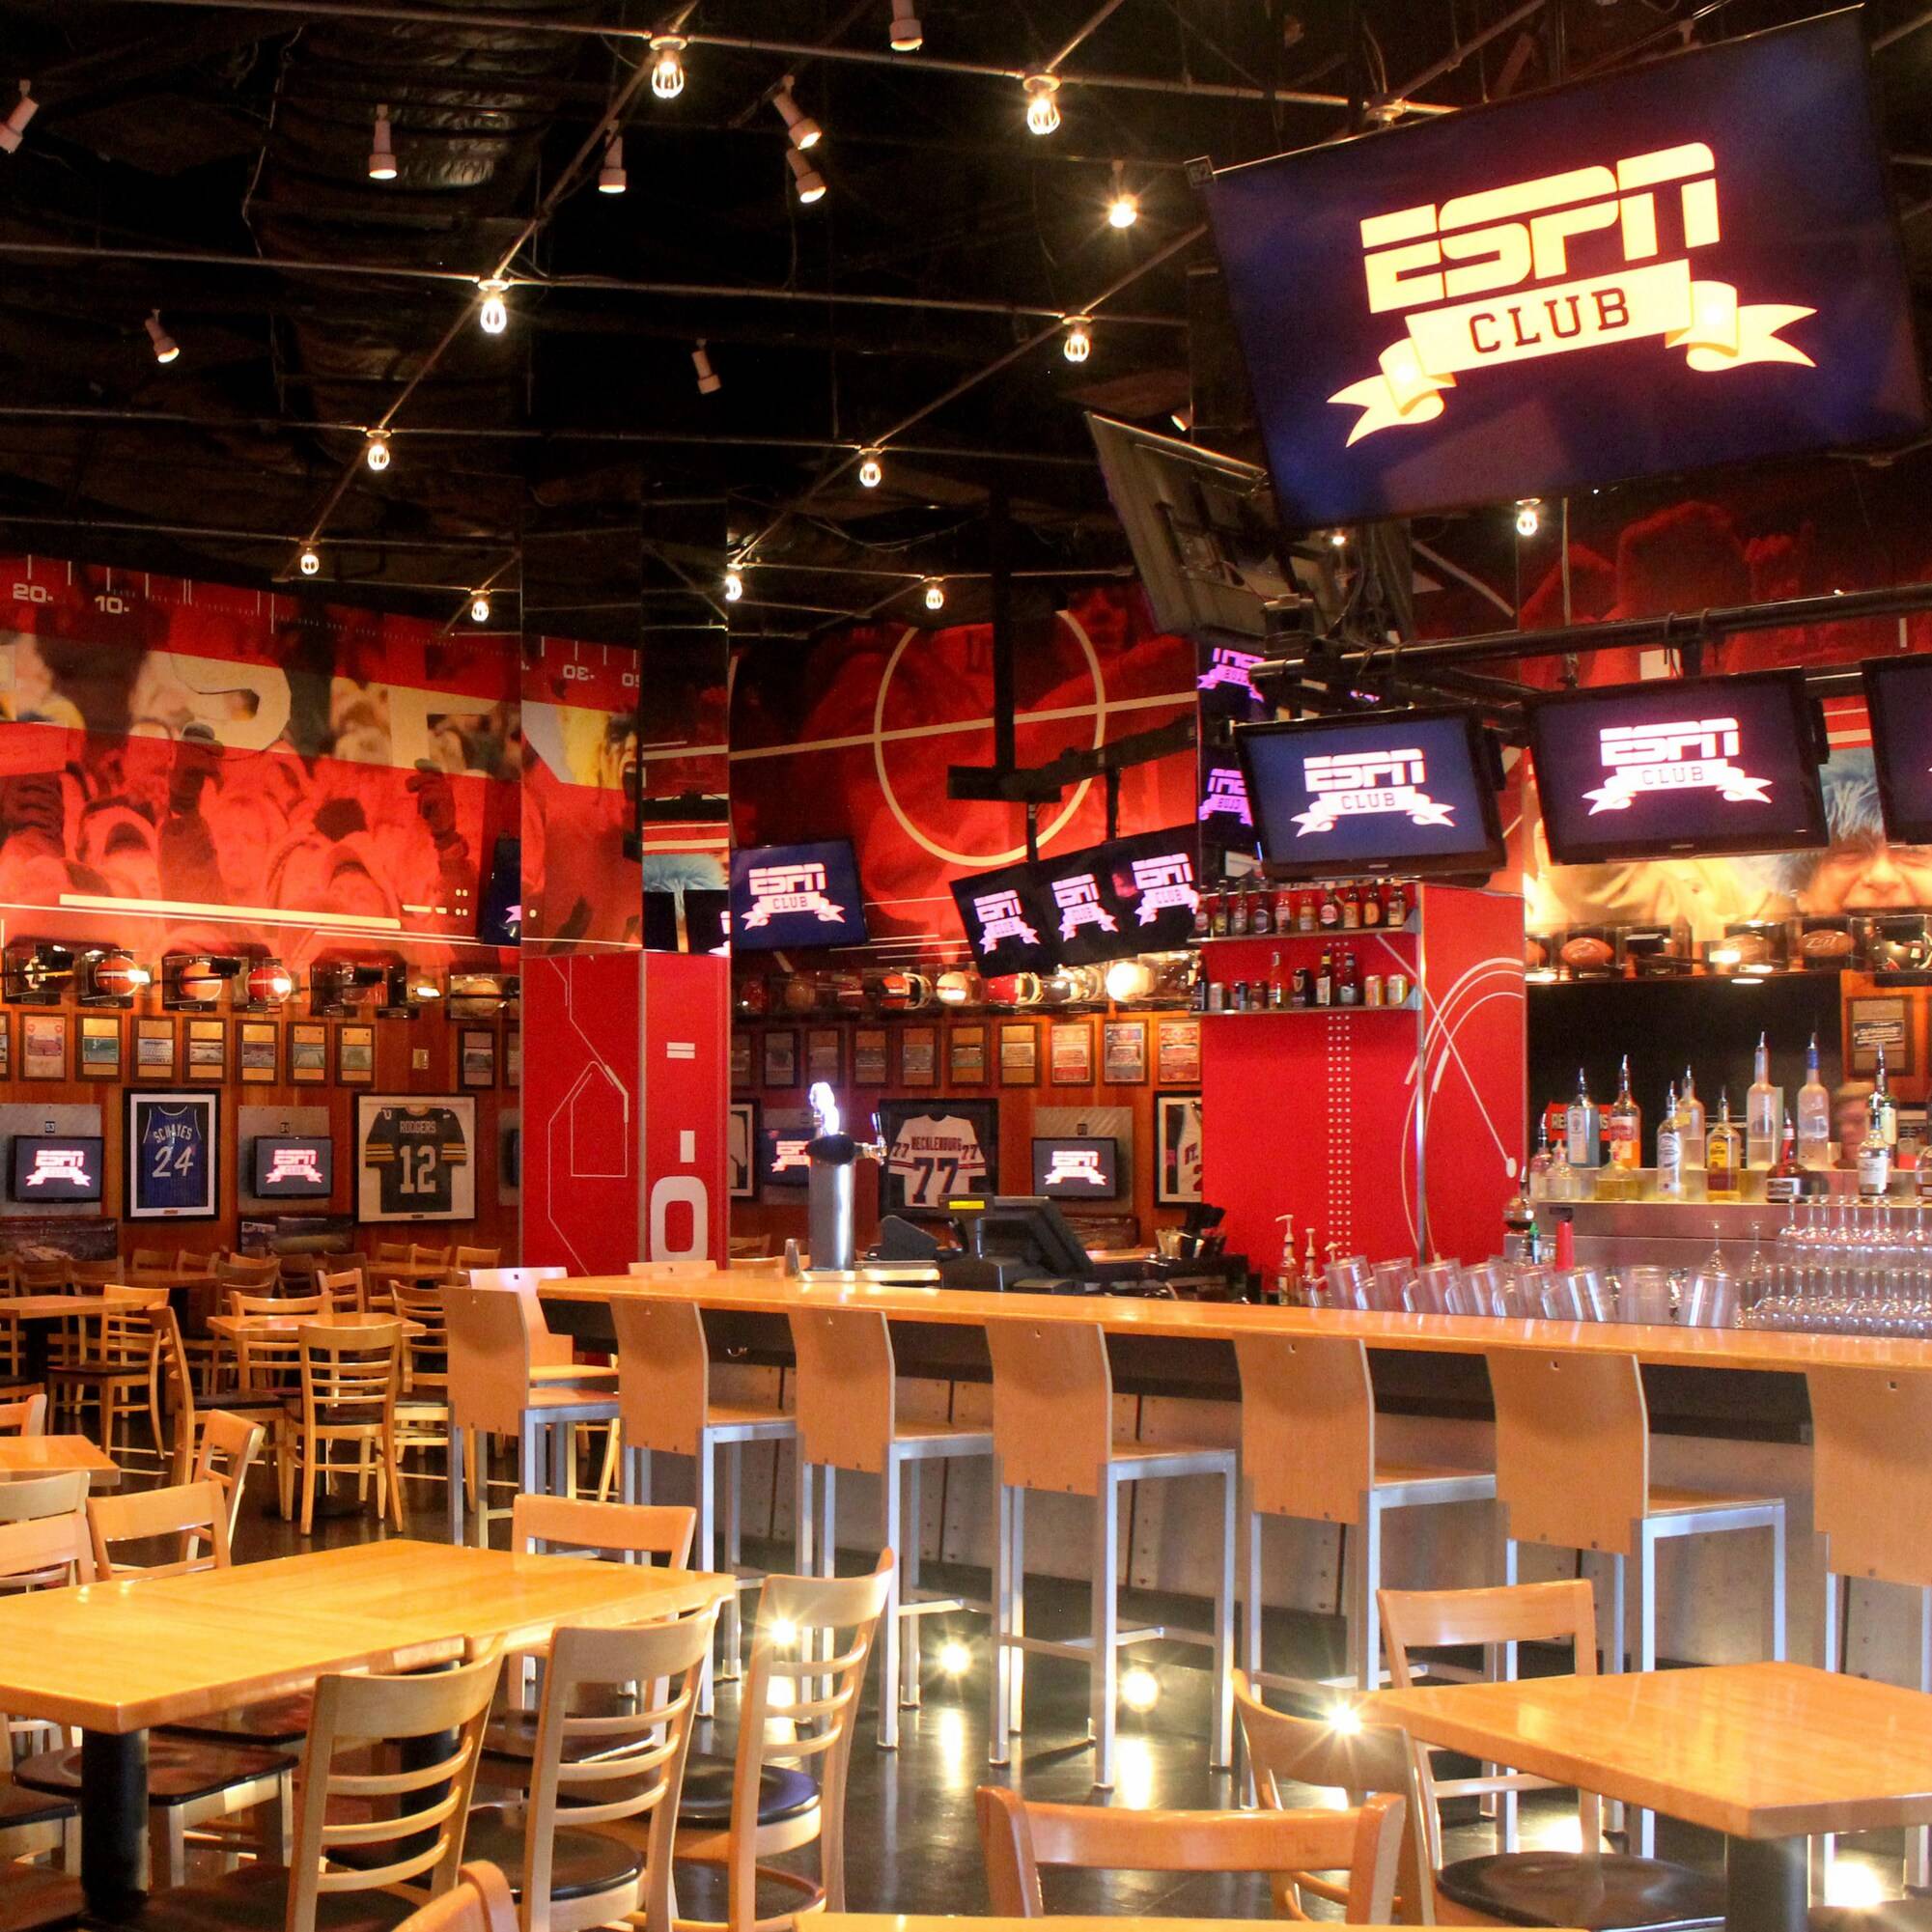 ESPN Club now offering reservations for lunch